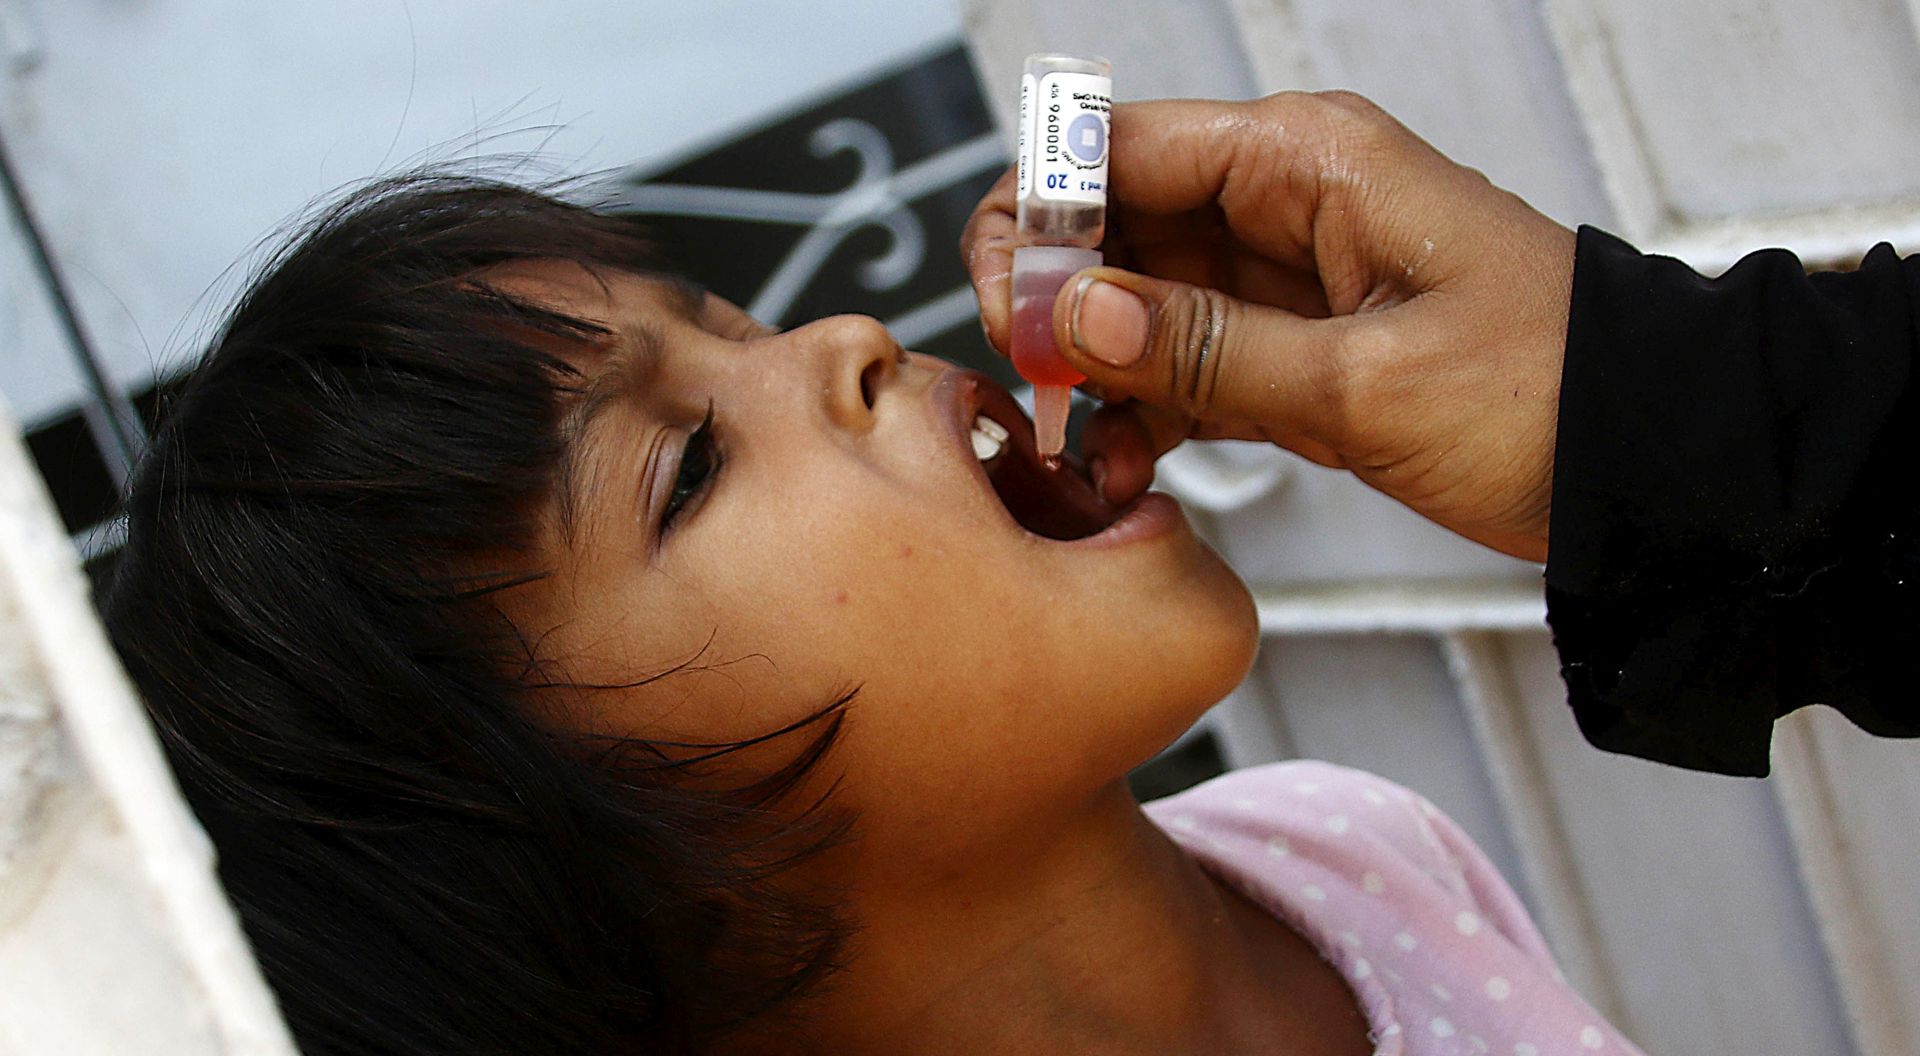 epa05983530 A health worker administers a Polio vaccine to a child, during a three-day countrywide vaccination campaign in Karachi, Pakistan, 23 May 2017. Pakistan is one of the last two countries, along with Afghanistan, where polio is still endemic. Though new polio cases dropped to a nine-year low in 2016, attacks by Islamist militants against health workers and police guarding them remained a challenge for a United Nations (UN)-funded vaccination campaign.  EPA/SHAHZAIB AKBER